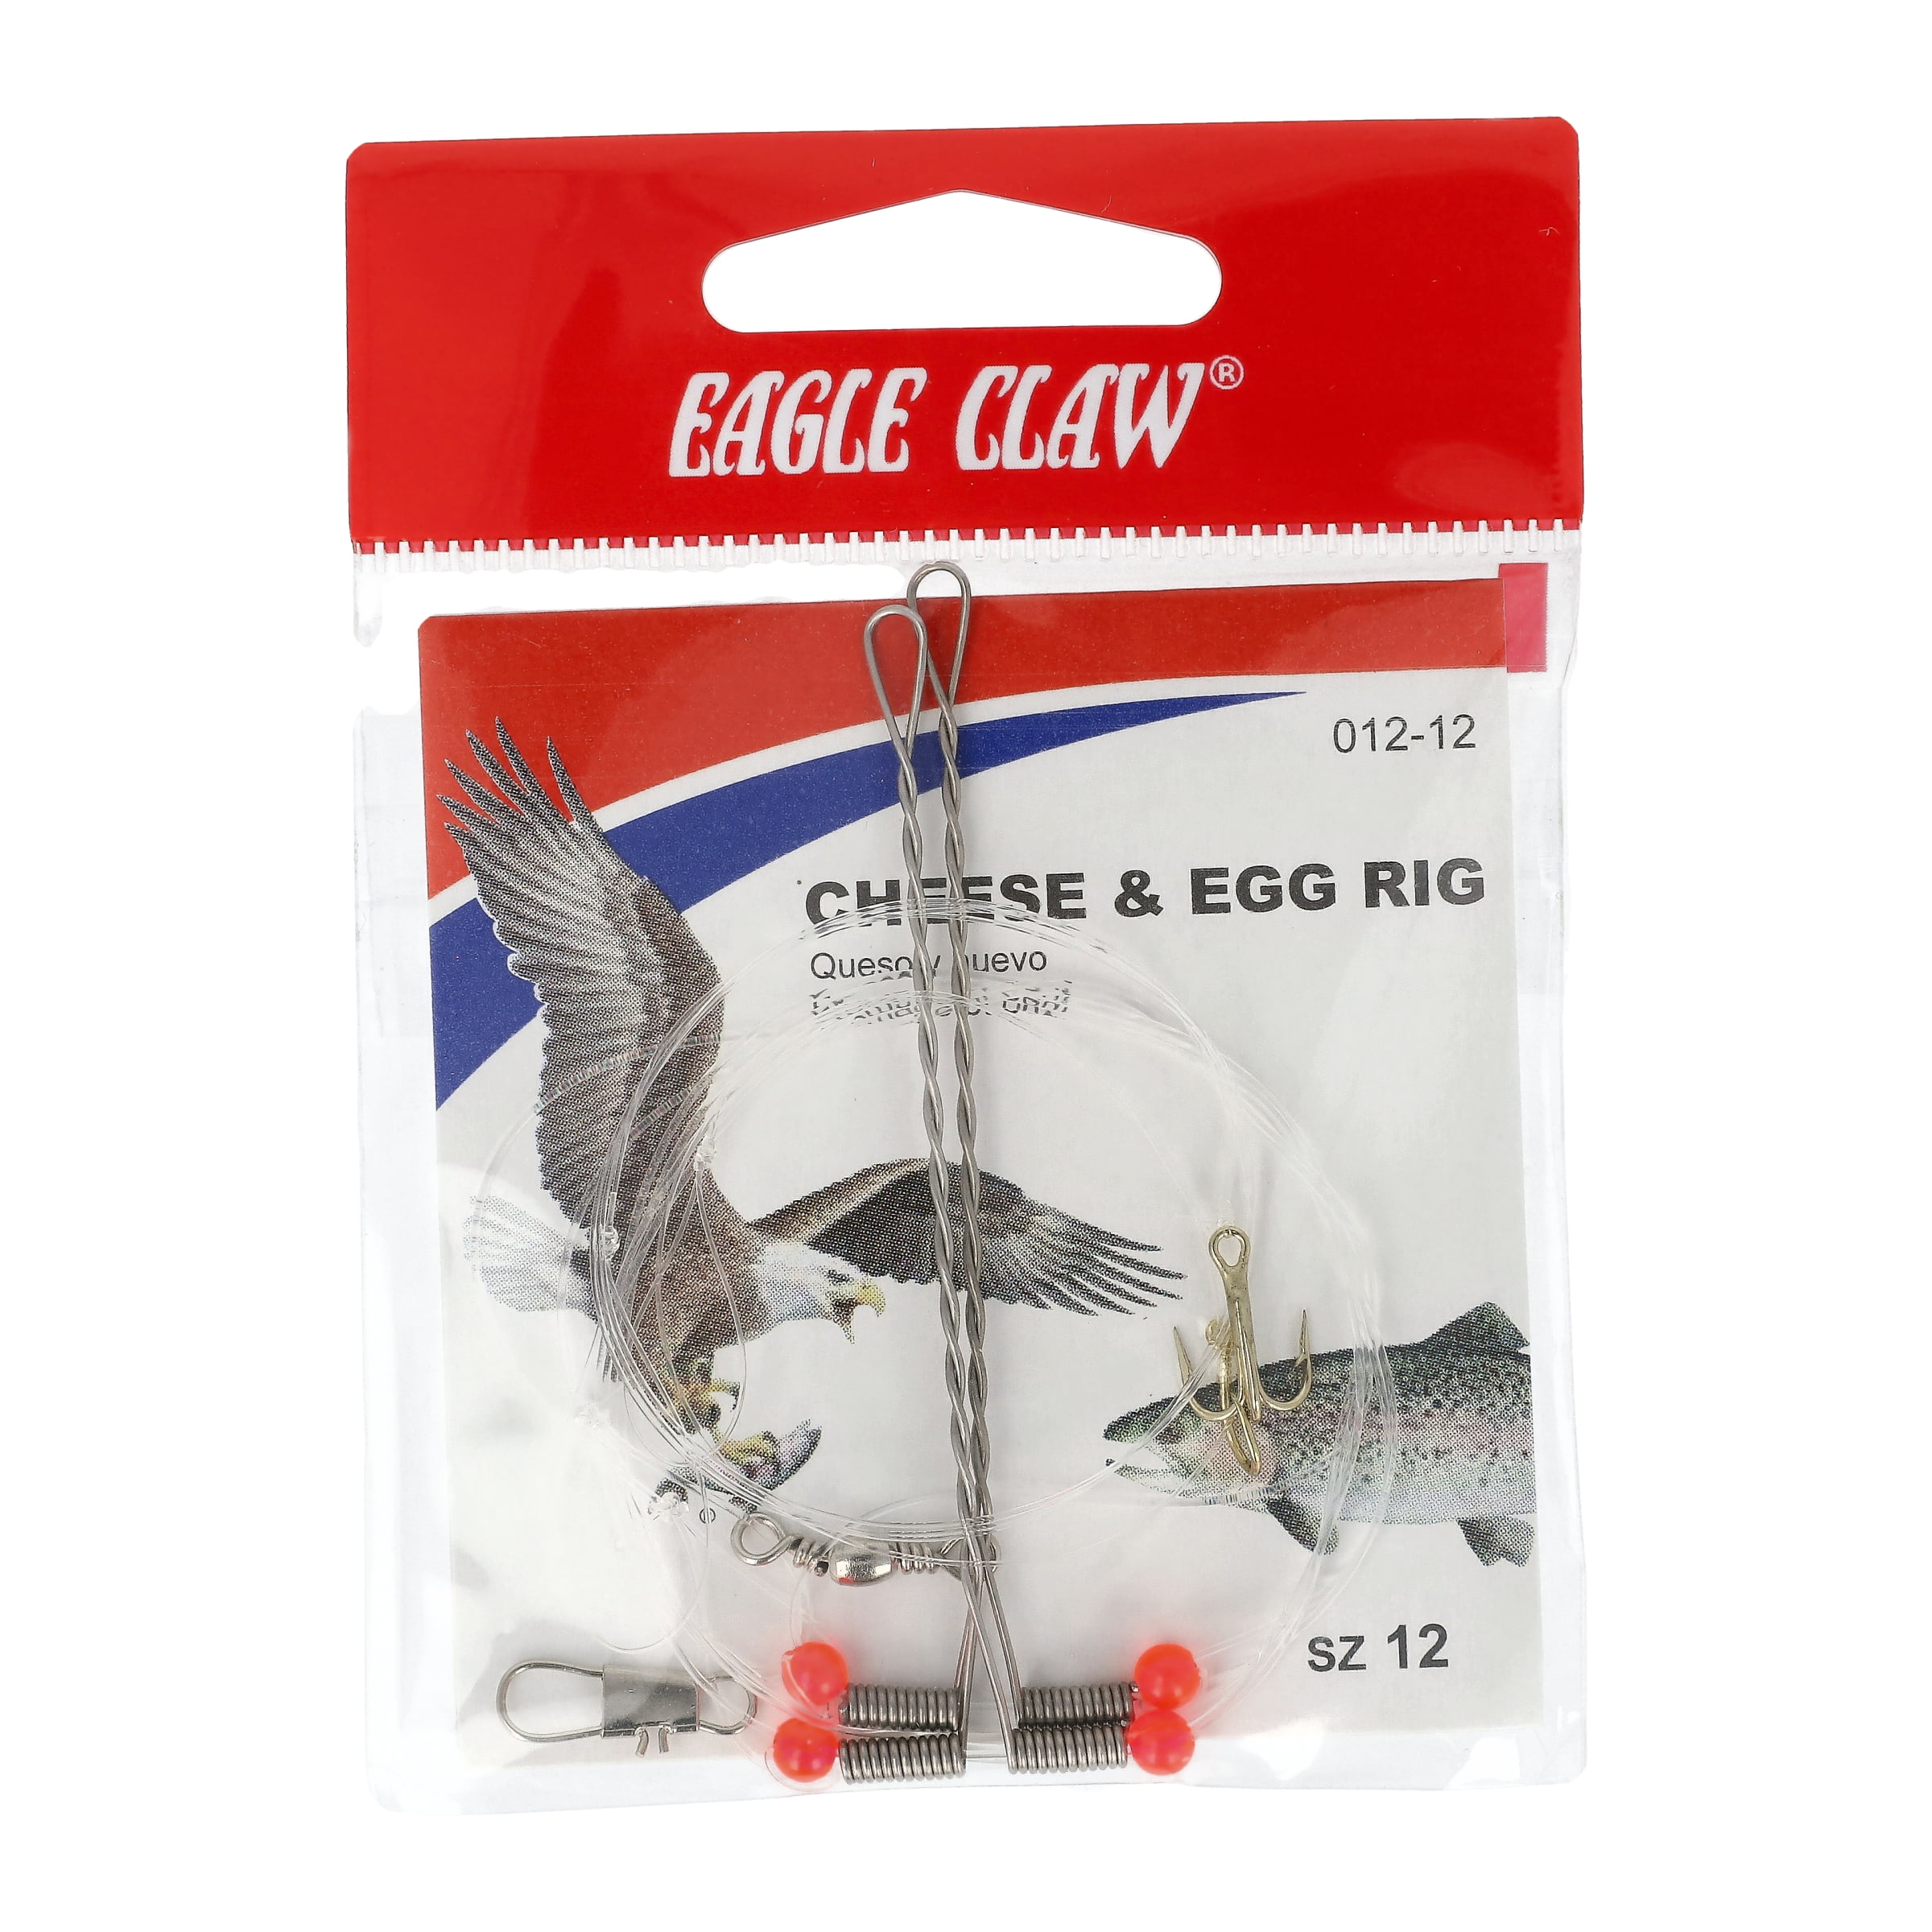 Eagle Claw Snelled Salmon Egg Hook 051H 12